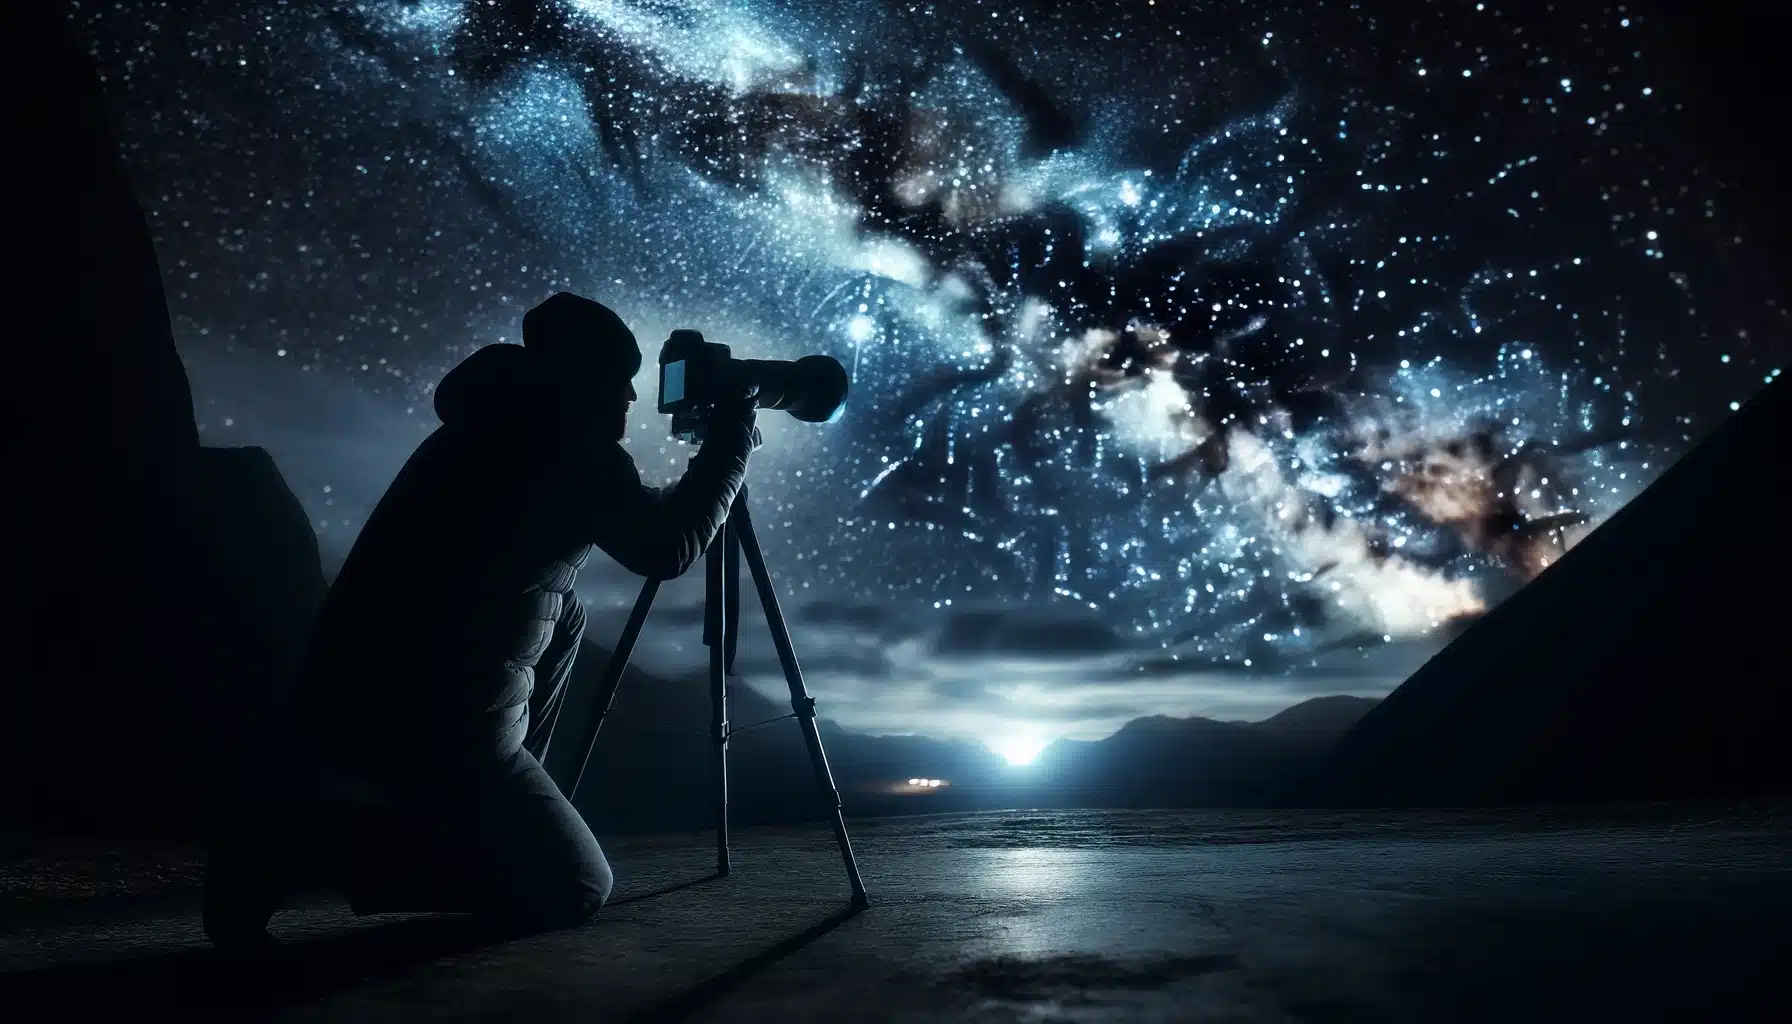 Photographer in a remote location using a tripod-mounted DSLR to capture the astrophotography Milky Way under a star-filled night sky.